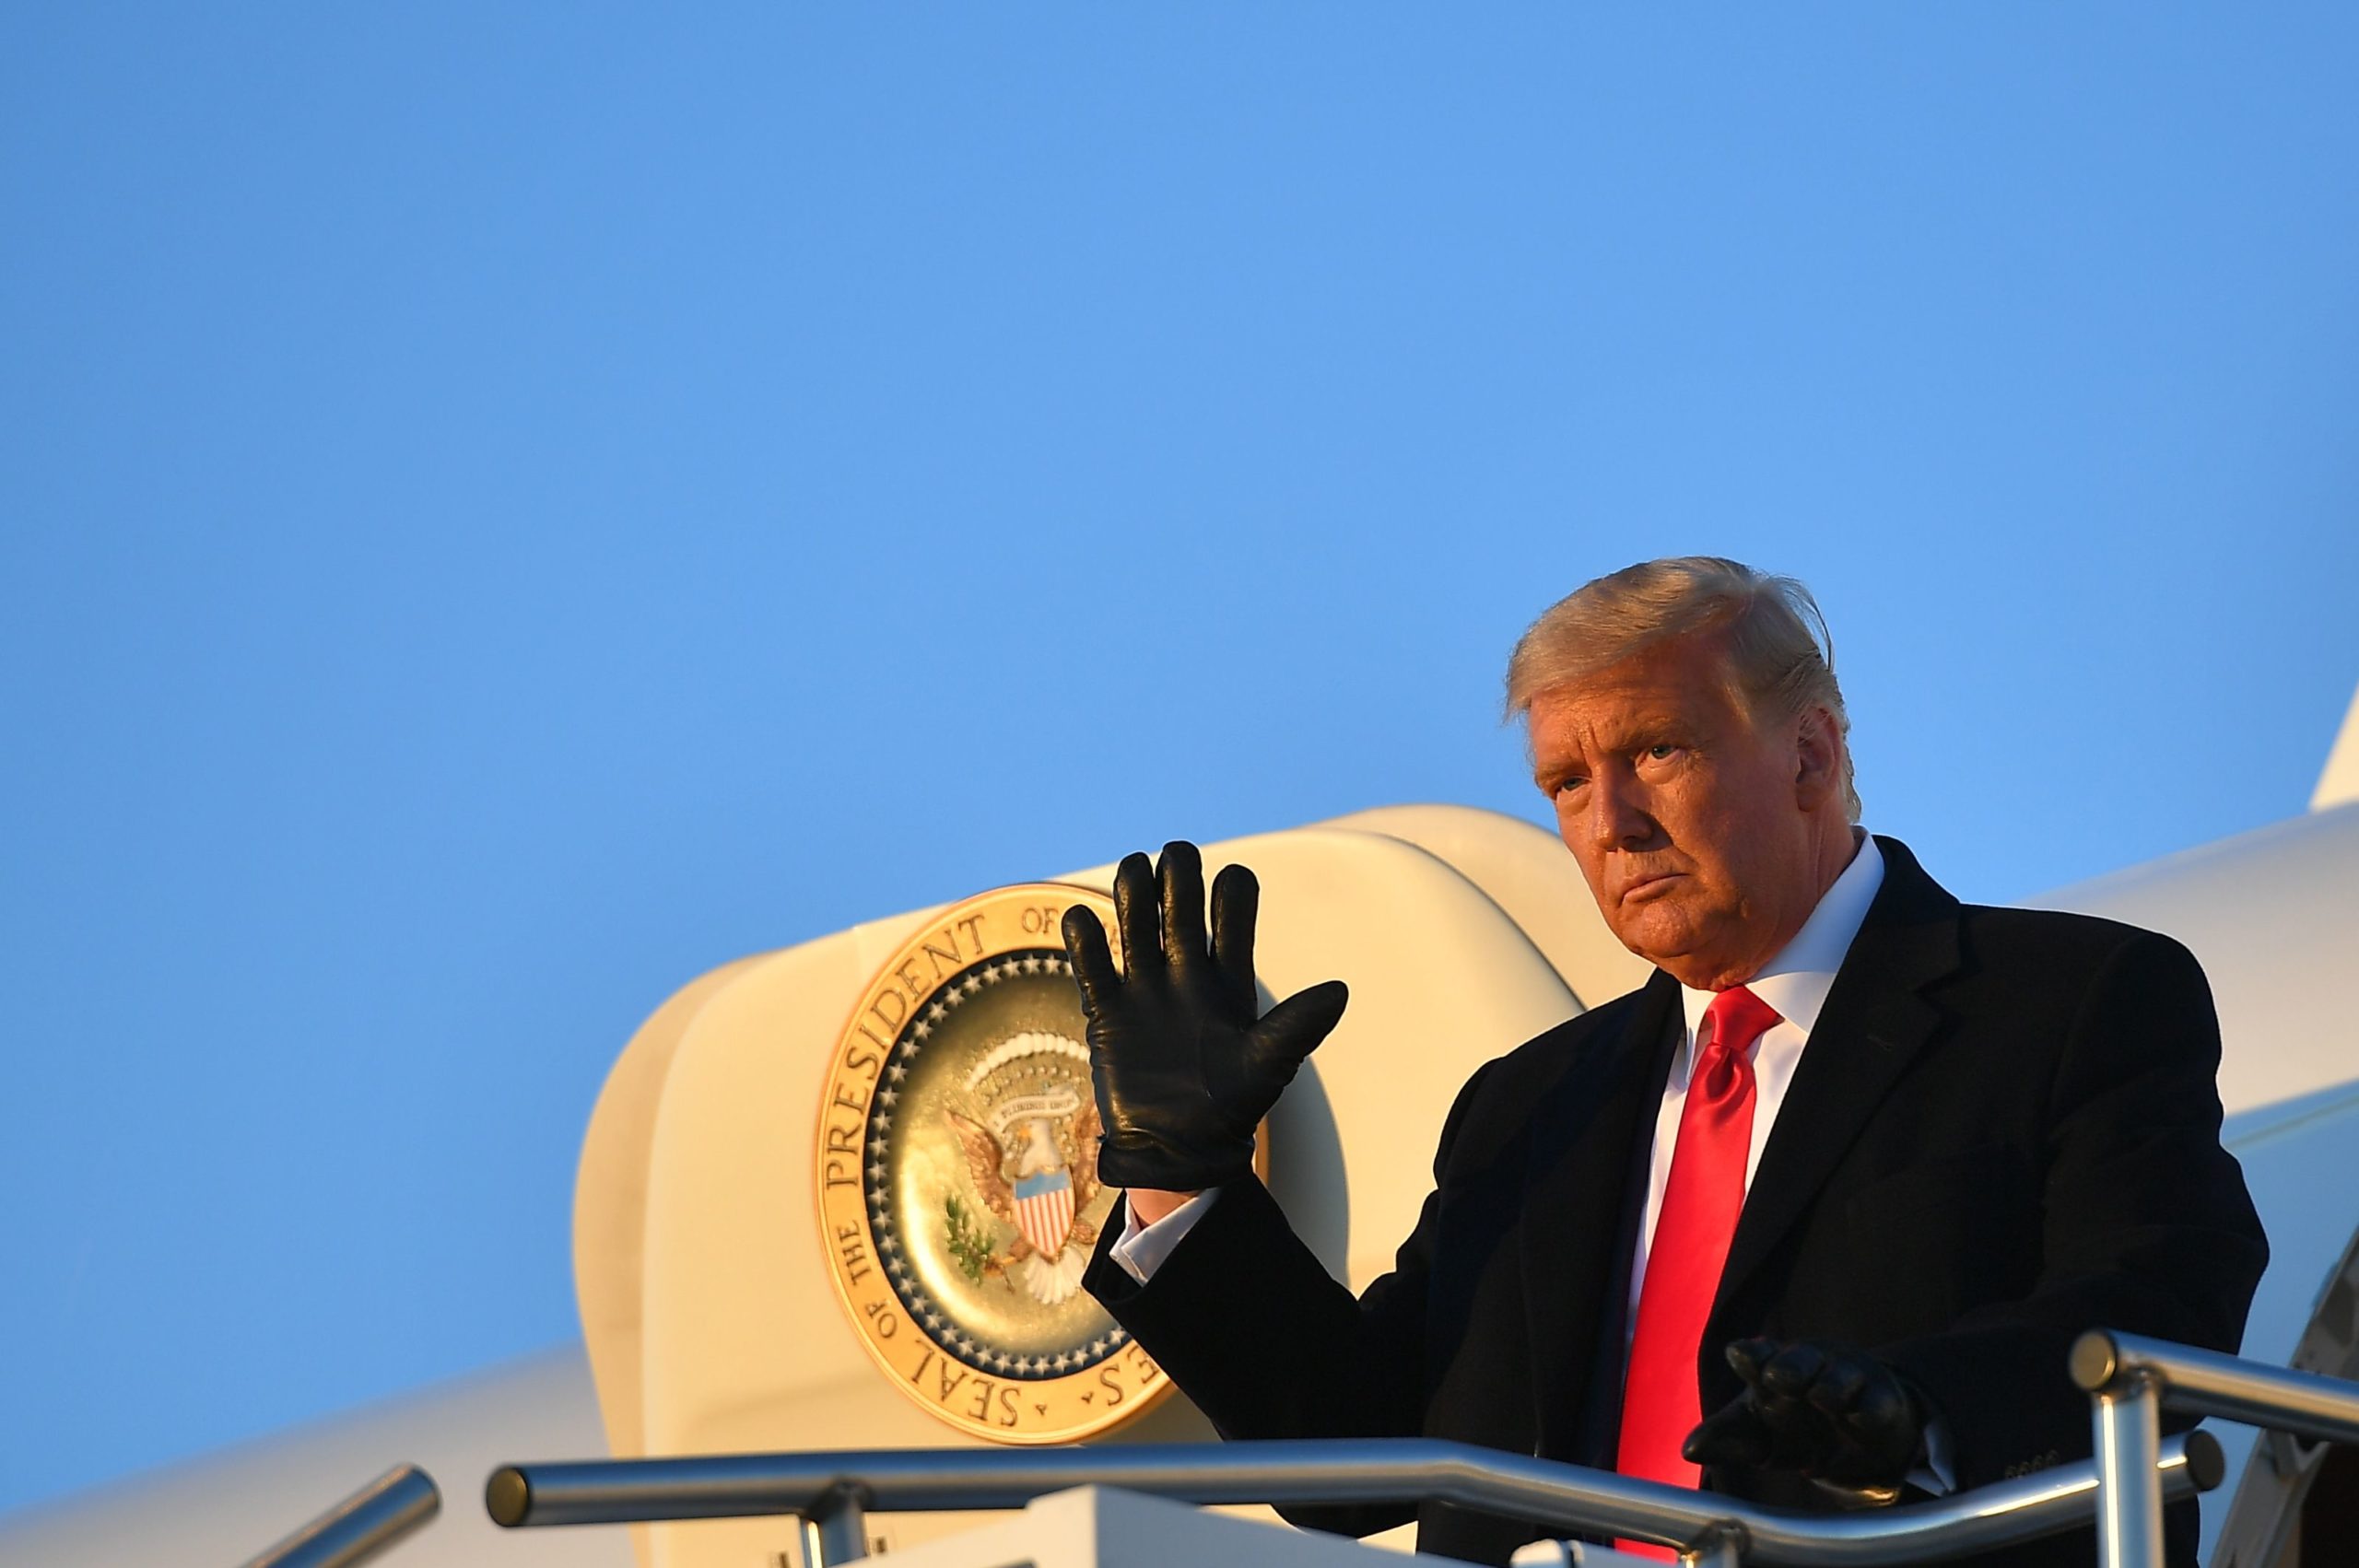 US President Donald Trump steps off Air Force One upon arrival at Pittsburgh International Airport in Pittsburgh, Pennsylvania on October 31, 2020. (MANDEL NGAN/AFP via Getty Images)